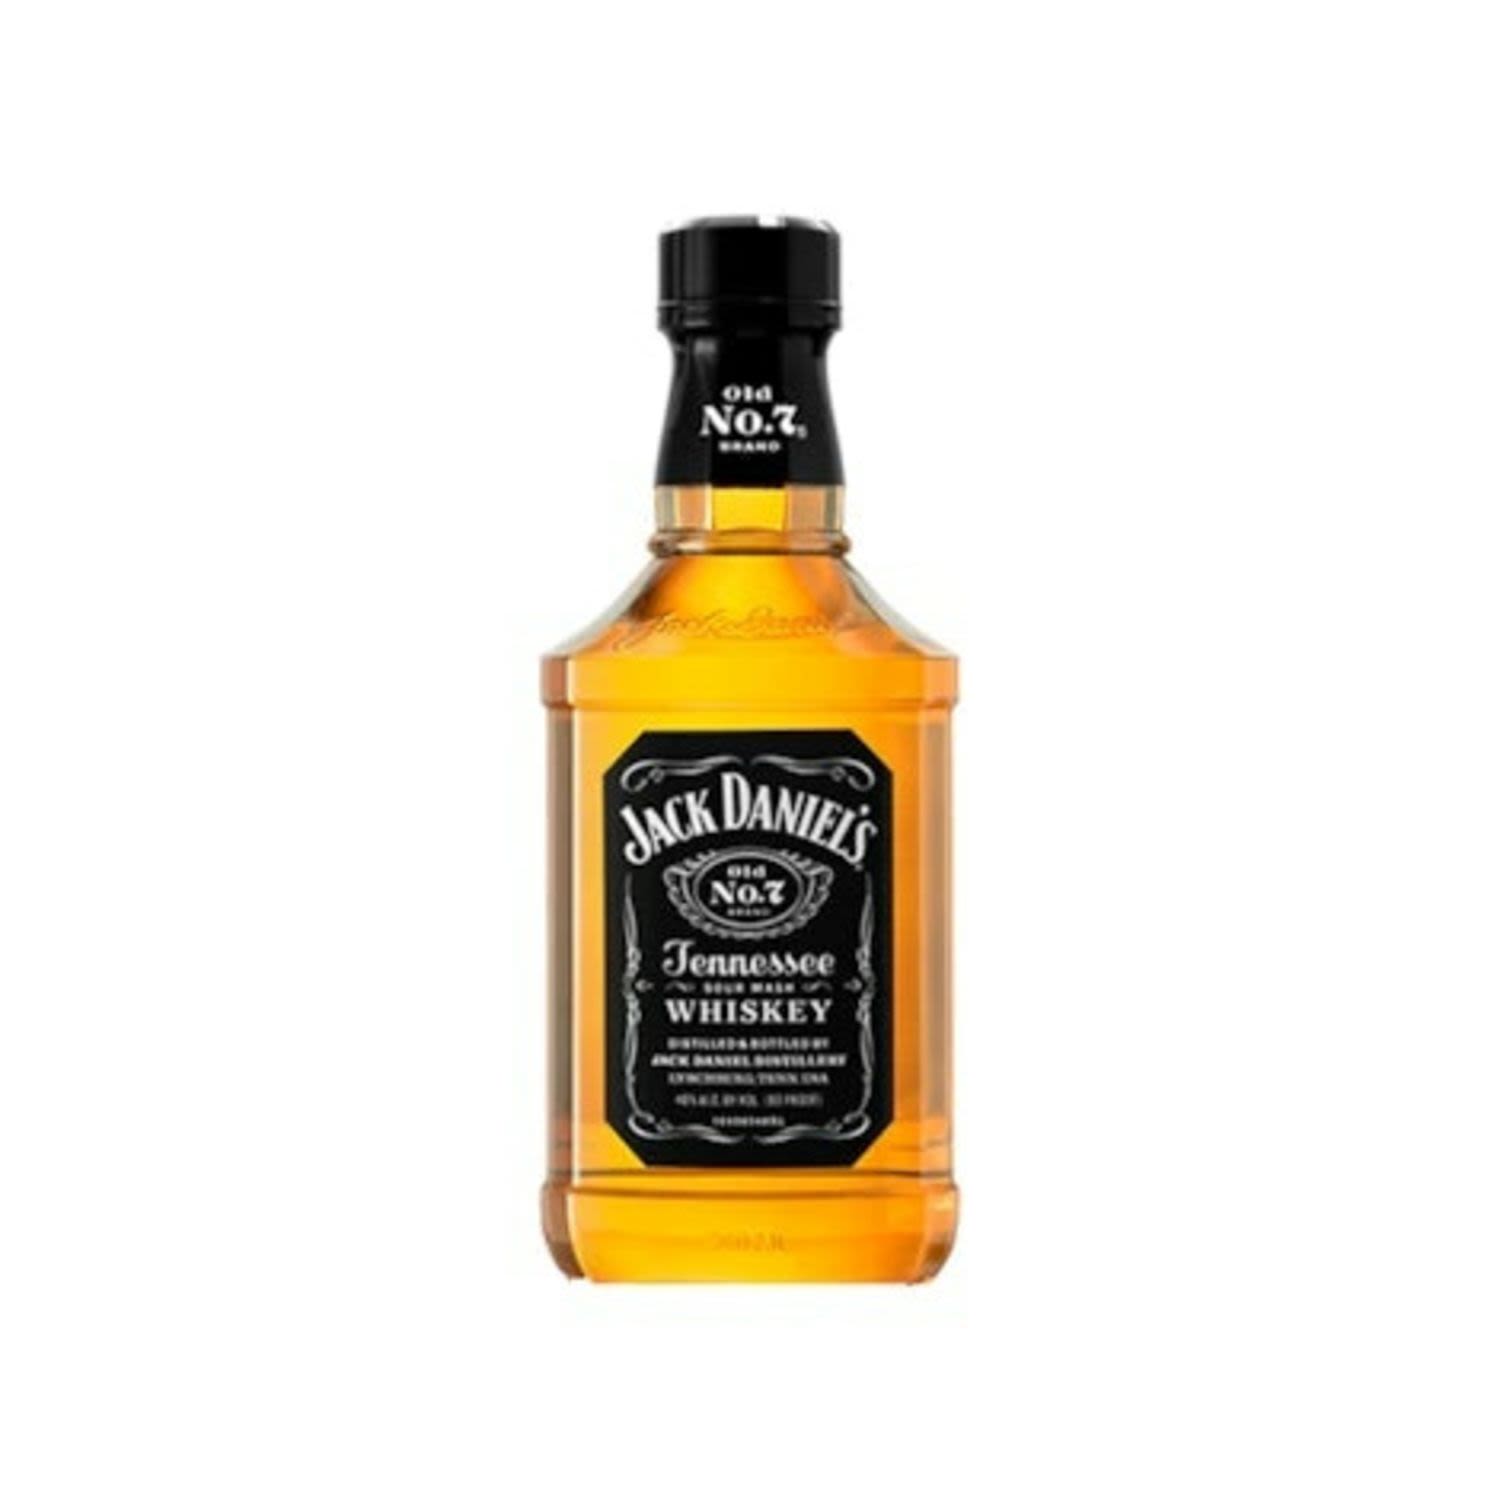 Jack Daniel's Old No. 7 Tennessee Whiskey 200mL Bottle